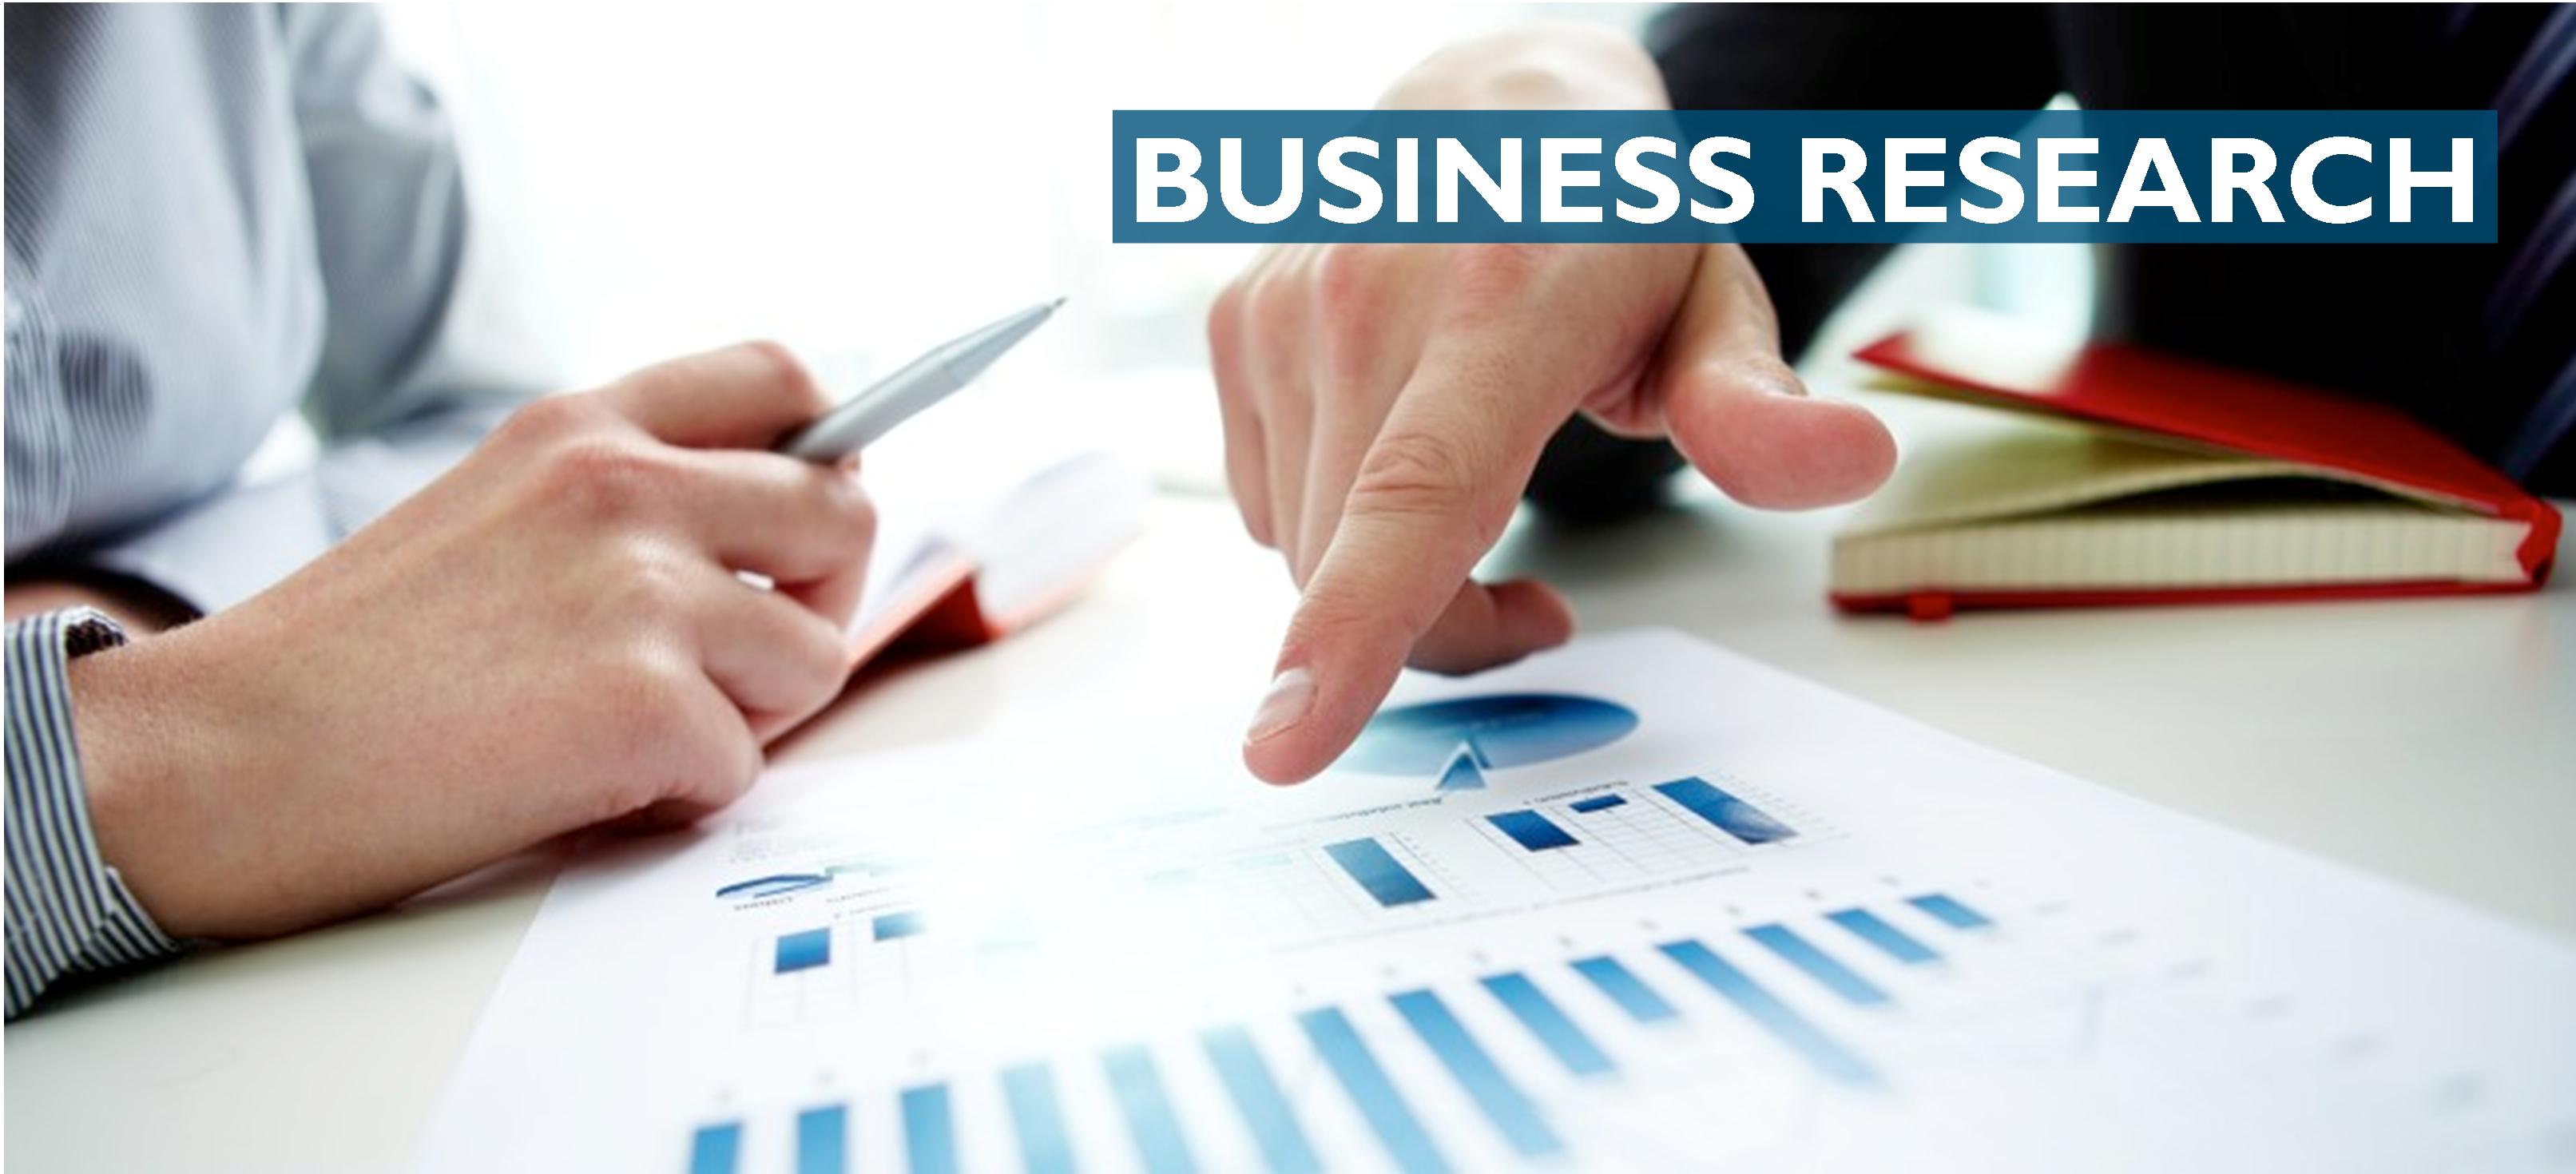 Business Research Services In Kenya- 2Max Solutions Limited